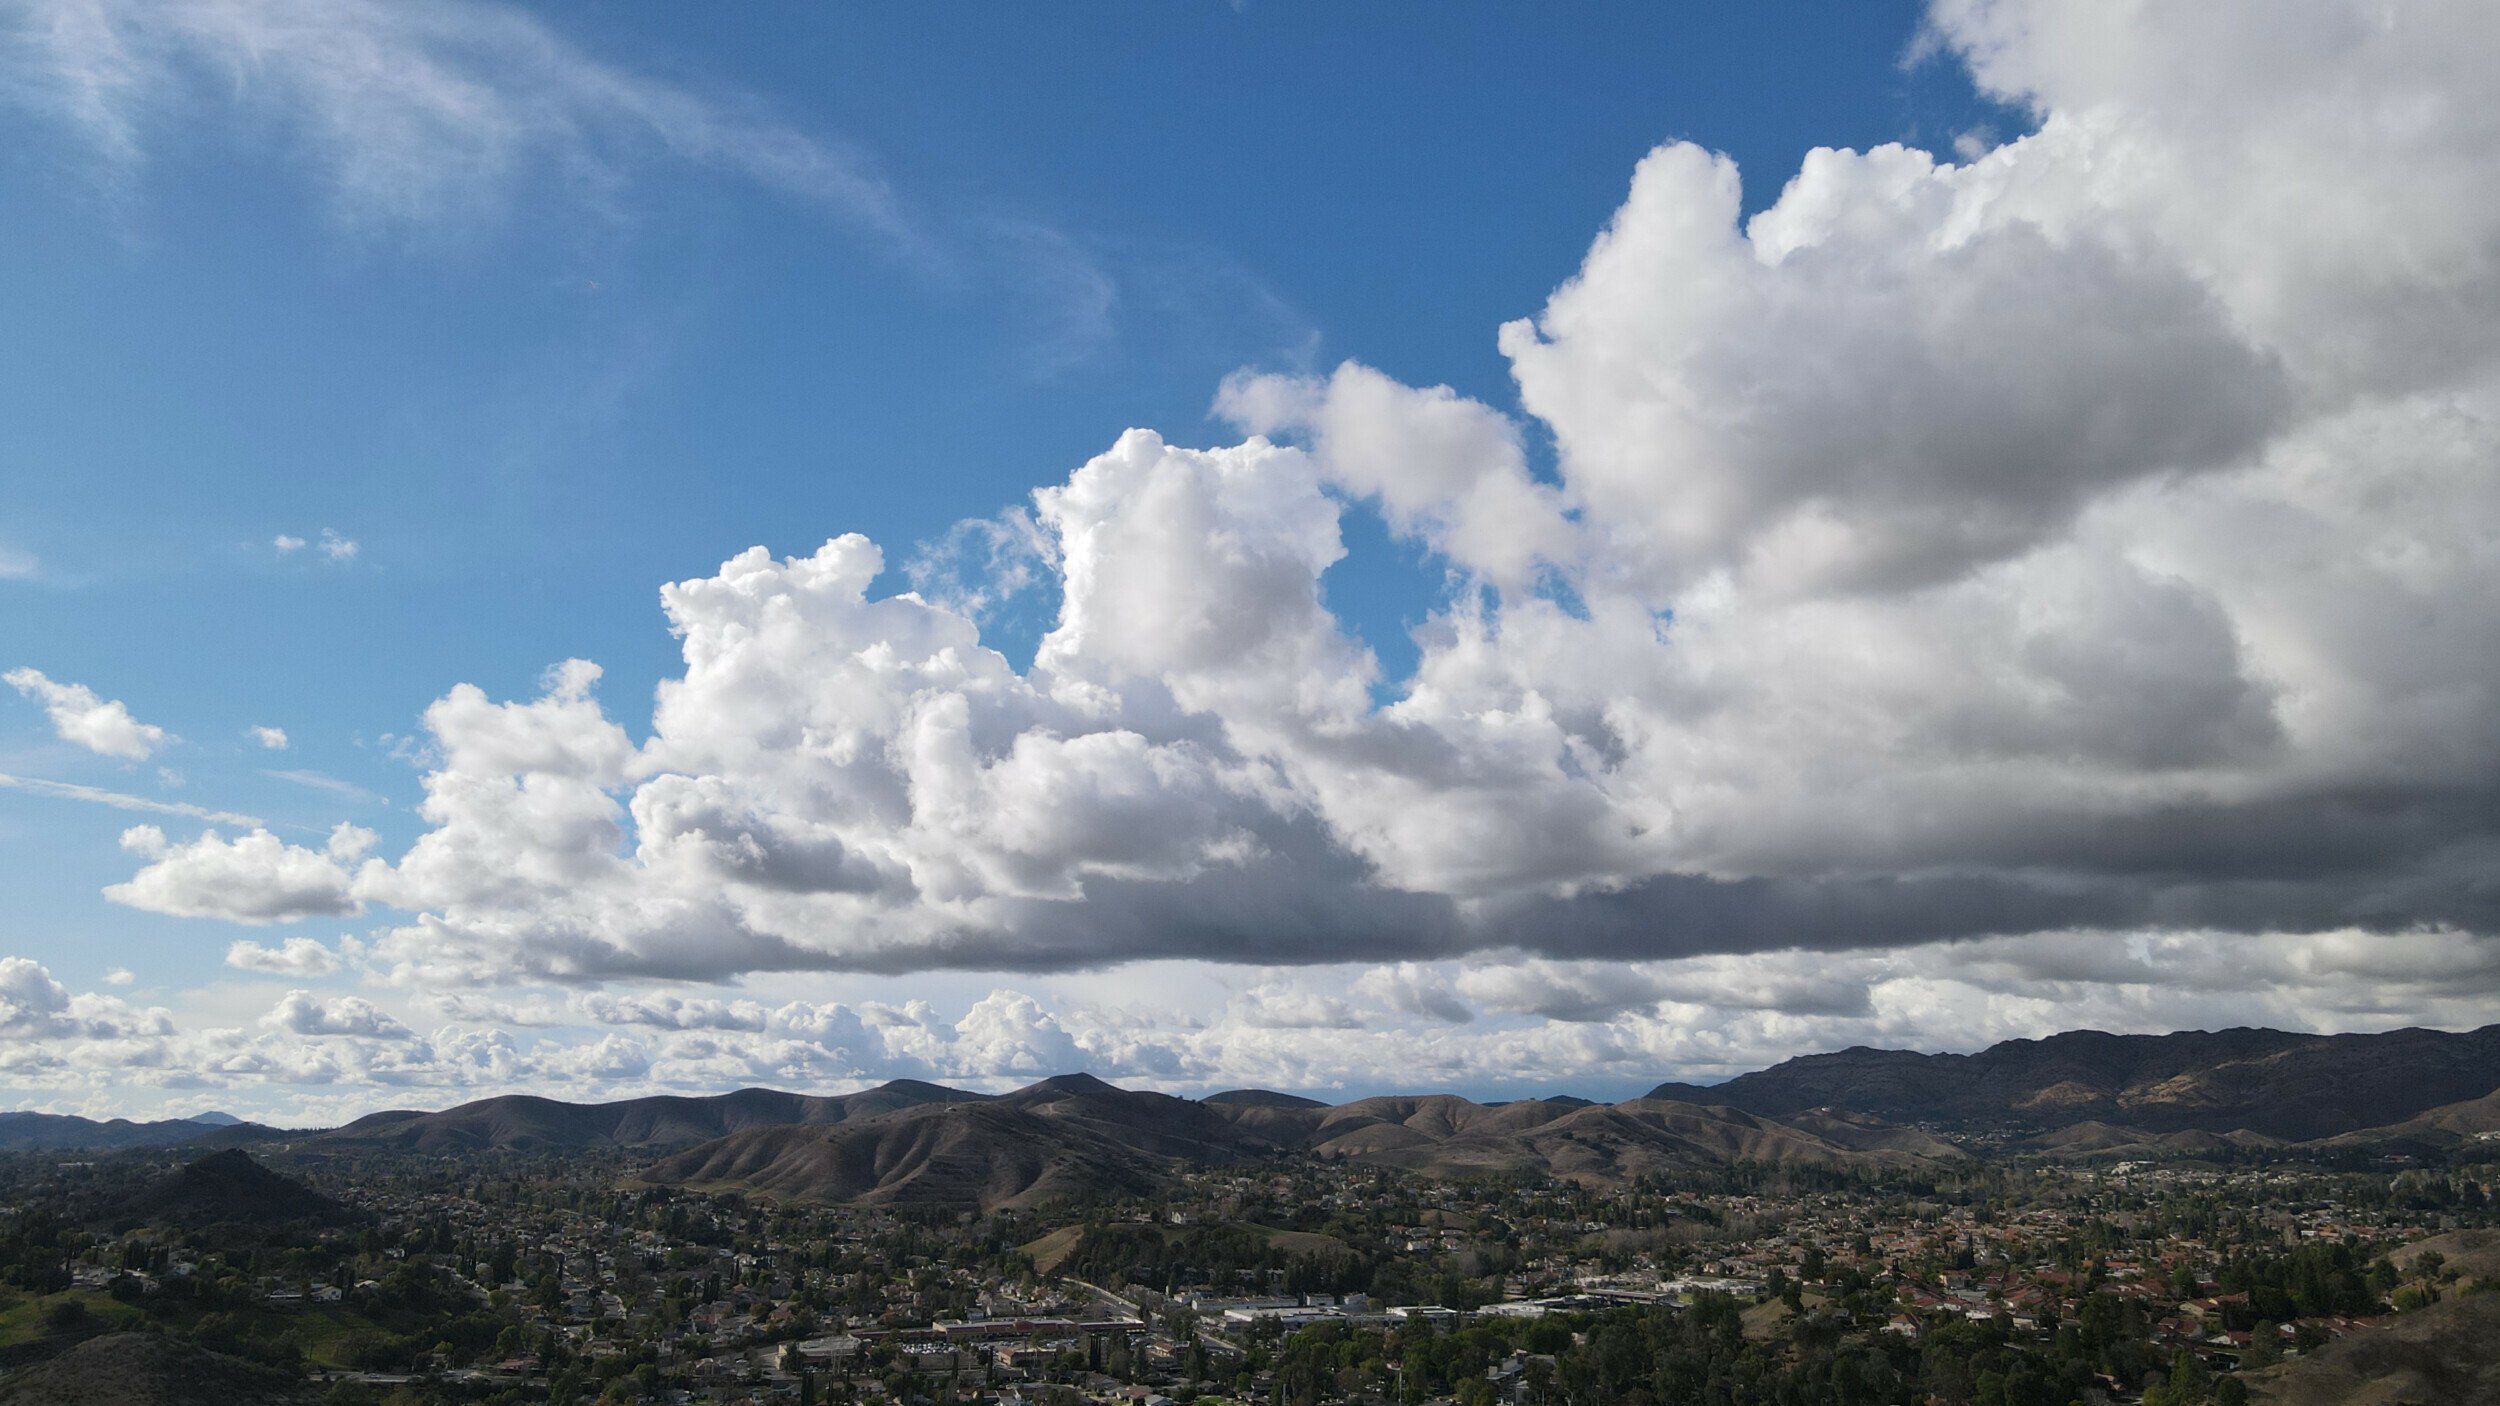 Aerial view of cloud-filled skies above the rolling landscape of Agoura Hills, taken with a DJI Mavic Air 2 drone.